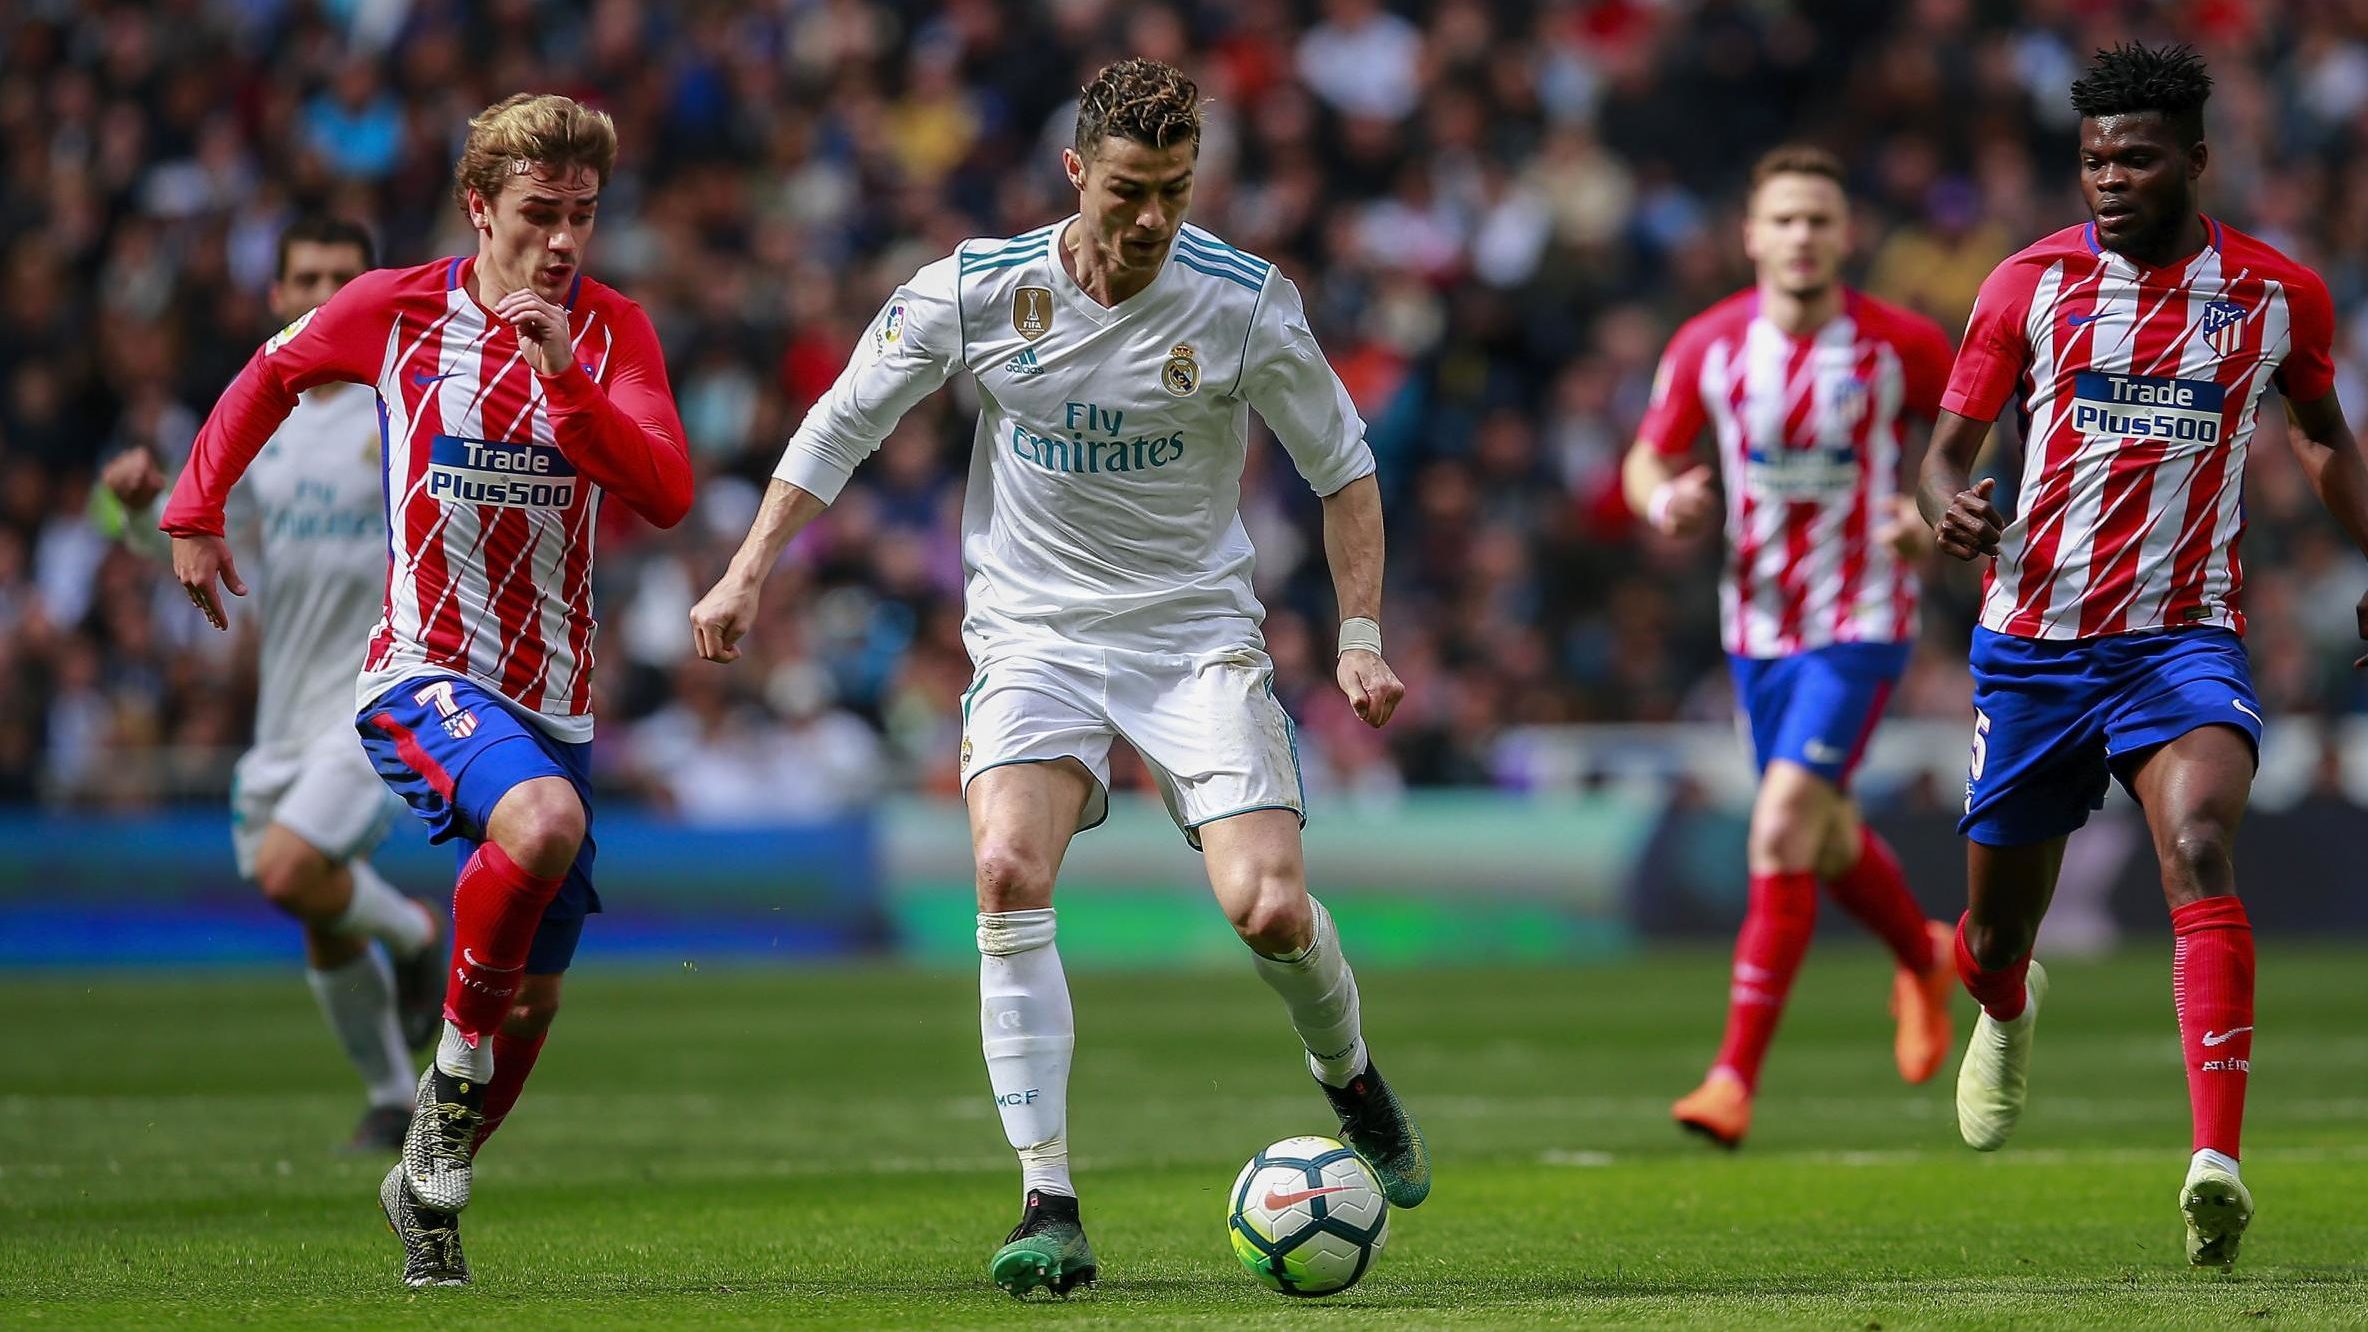 Real Madrid vs Atletico Madrid Watch Online: Preview Time, How to Live Stream and Winning Odds